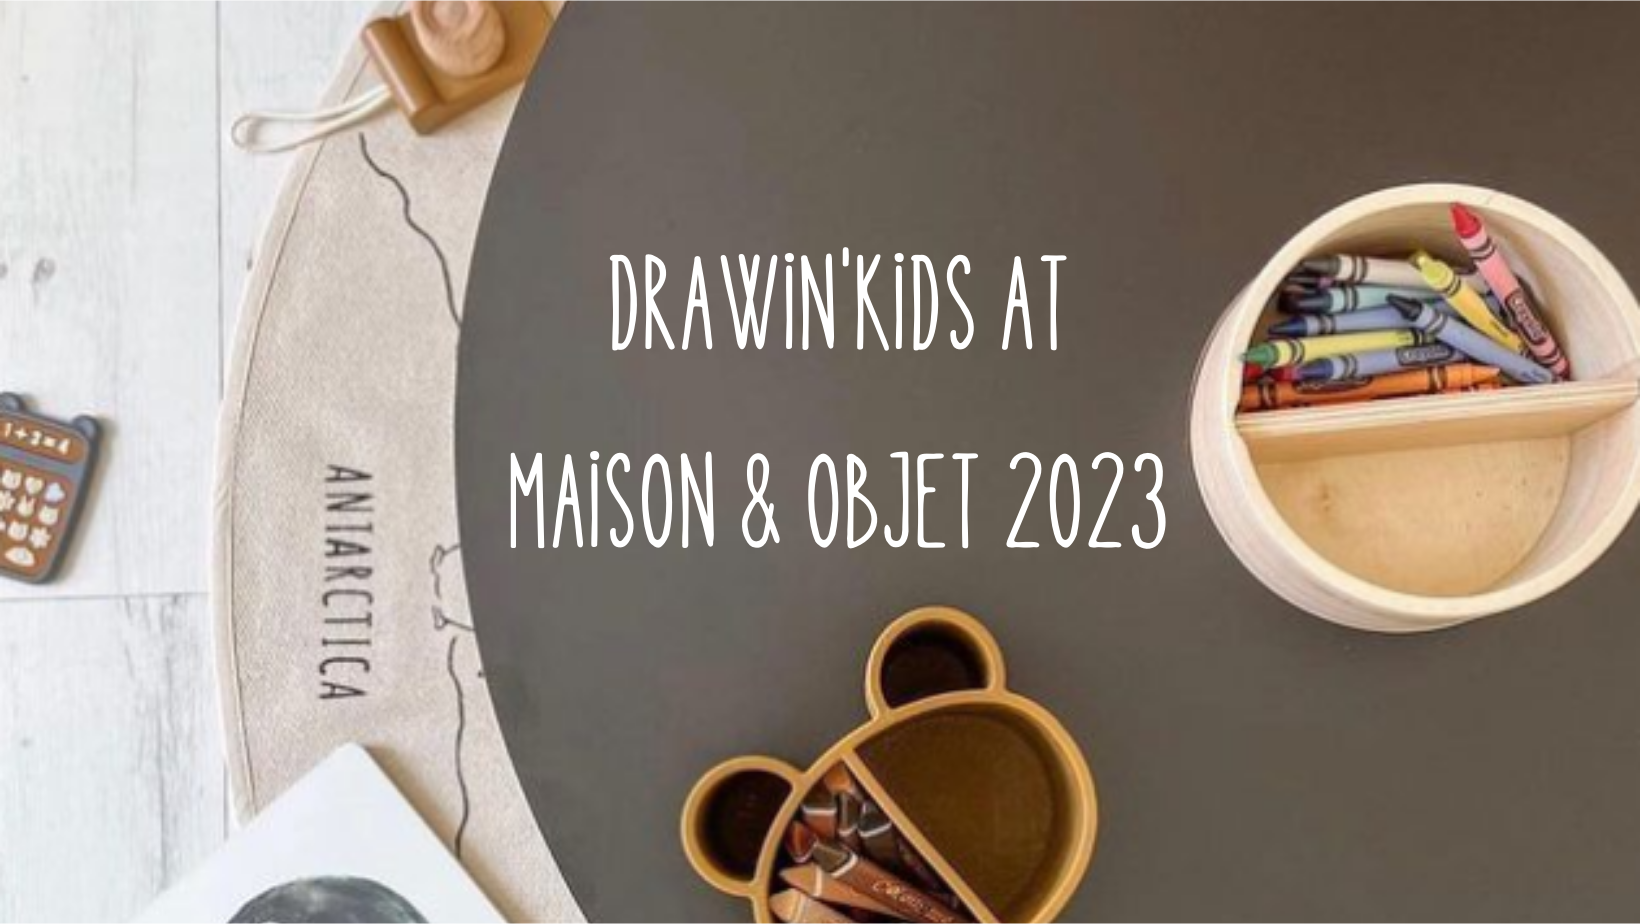 Drawin'kids at the Maison & Objet show for the first time